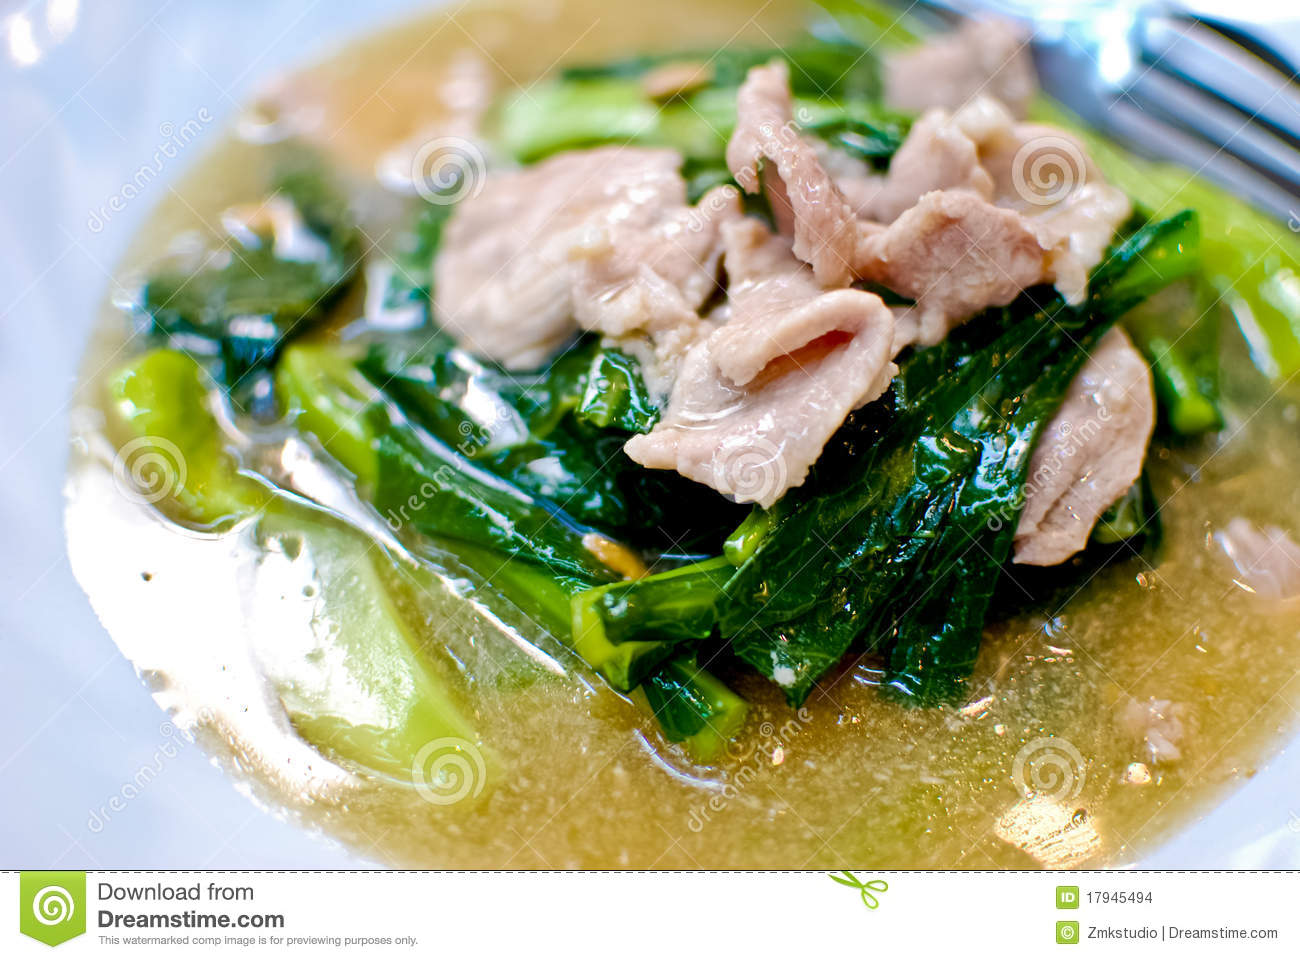 Asian Style Noodle With Pork Soup Stock Images   Image  17945494